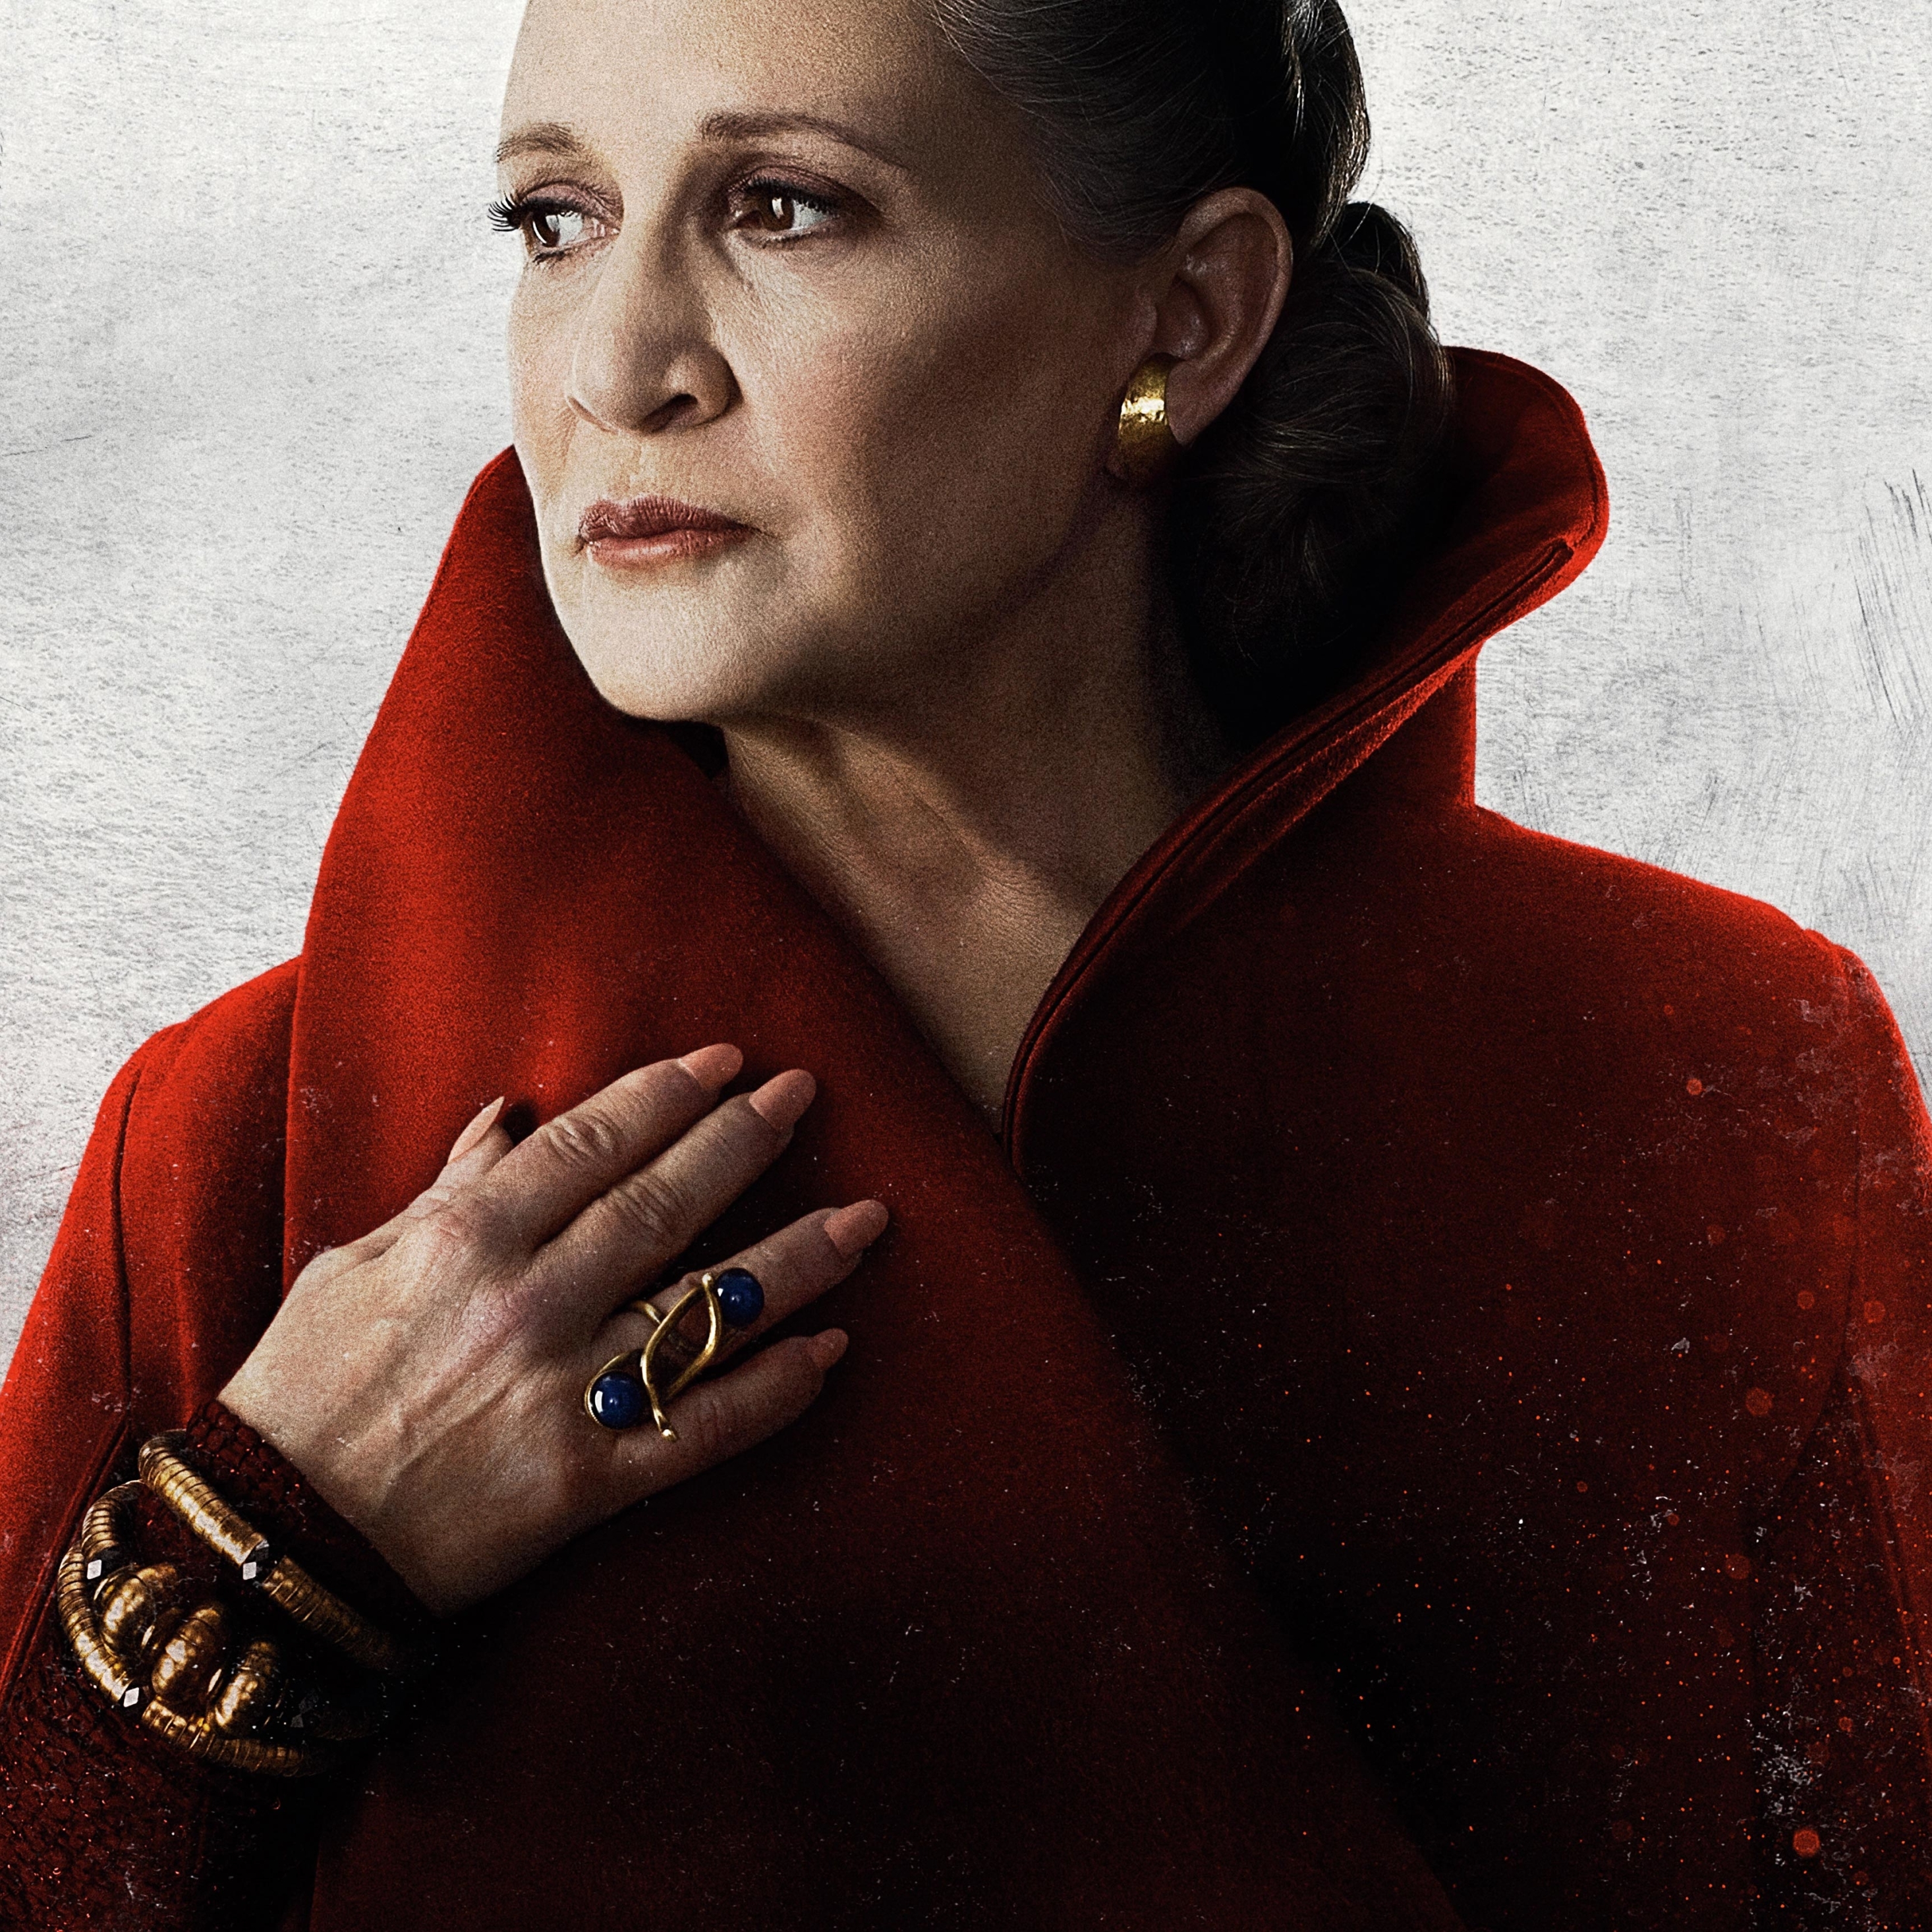 2932x2932 Princess Leia Star Wars The Last Jedi Ipad Pro Retina Display Wallpaper Hd Movies 4k Wallpapers Images Photos And Background